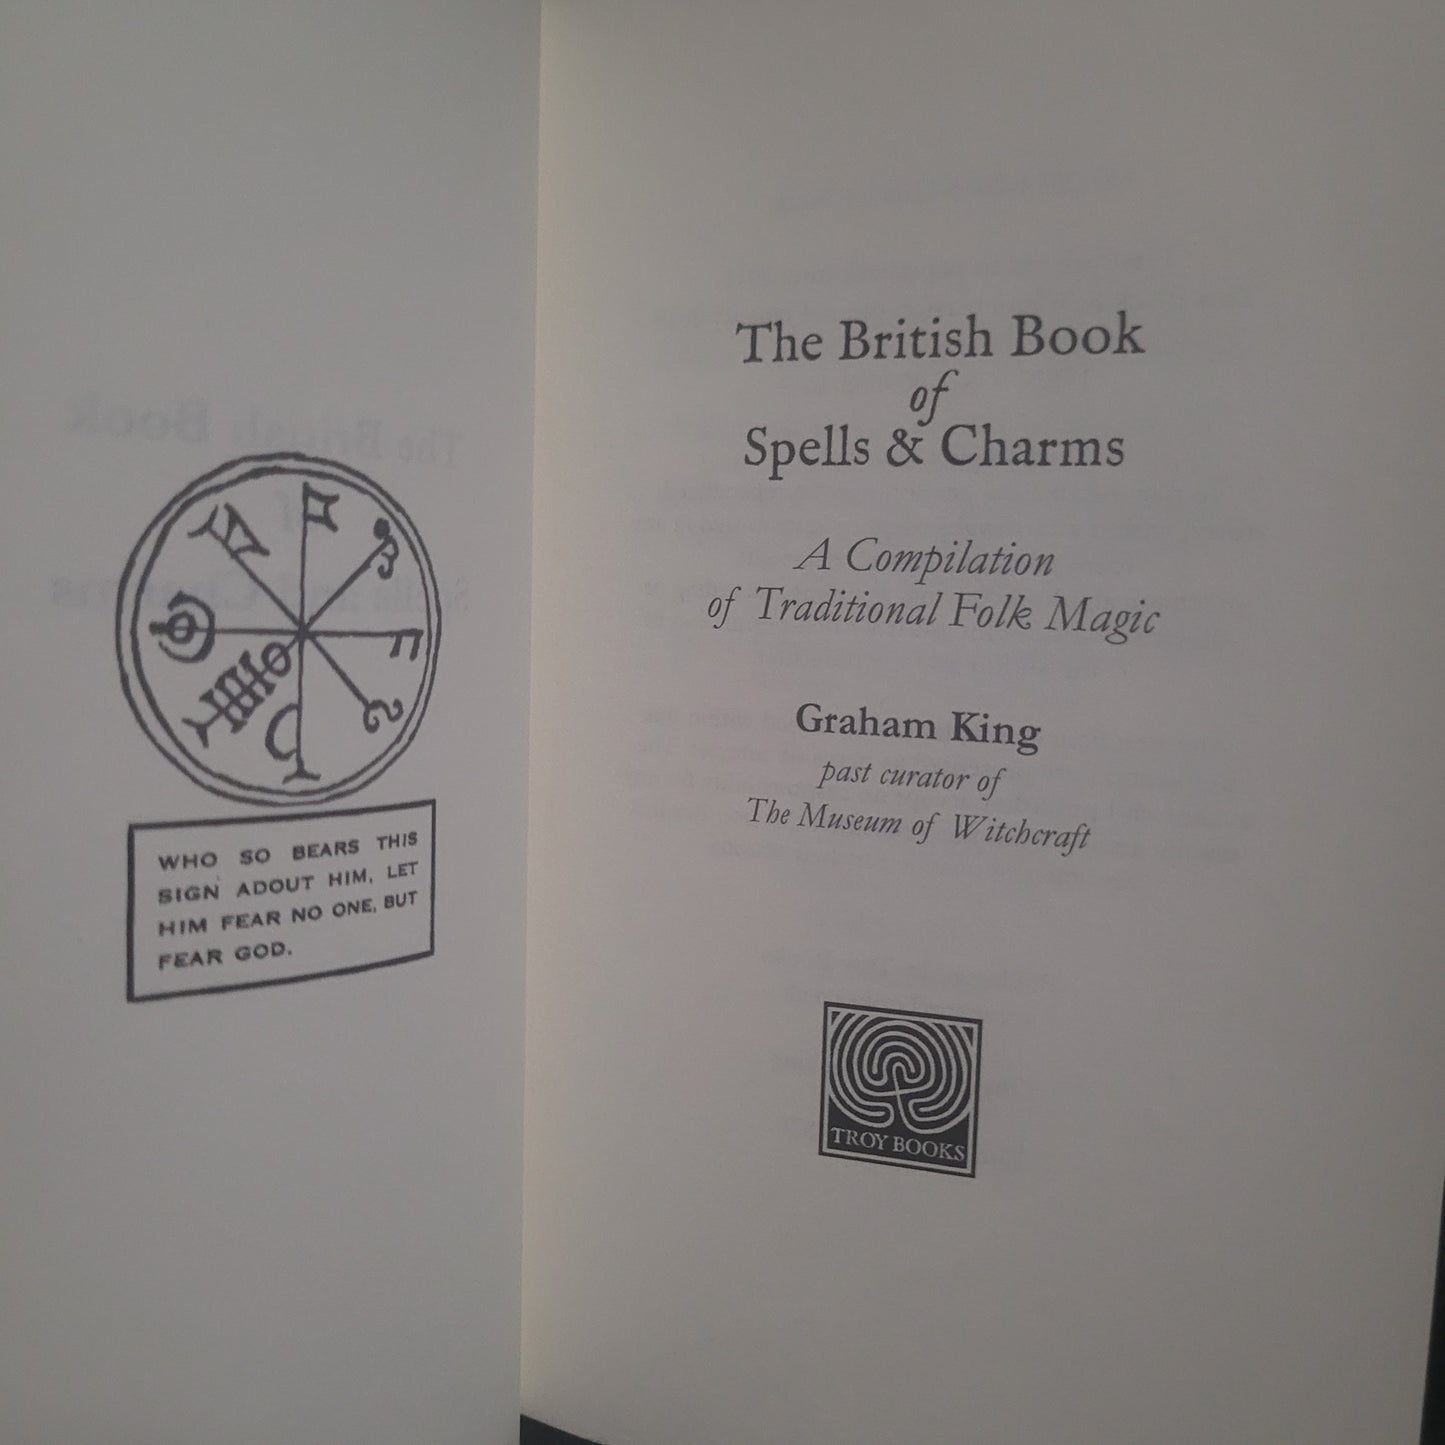 The British Book of Spells & Charms by Graham King (Troy Books, 2019) Paperback Black & White Edition